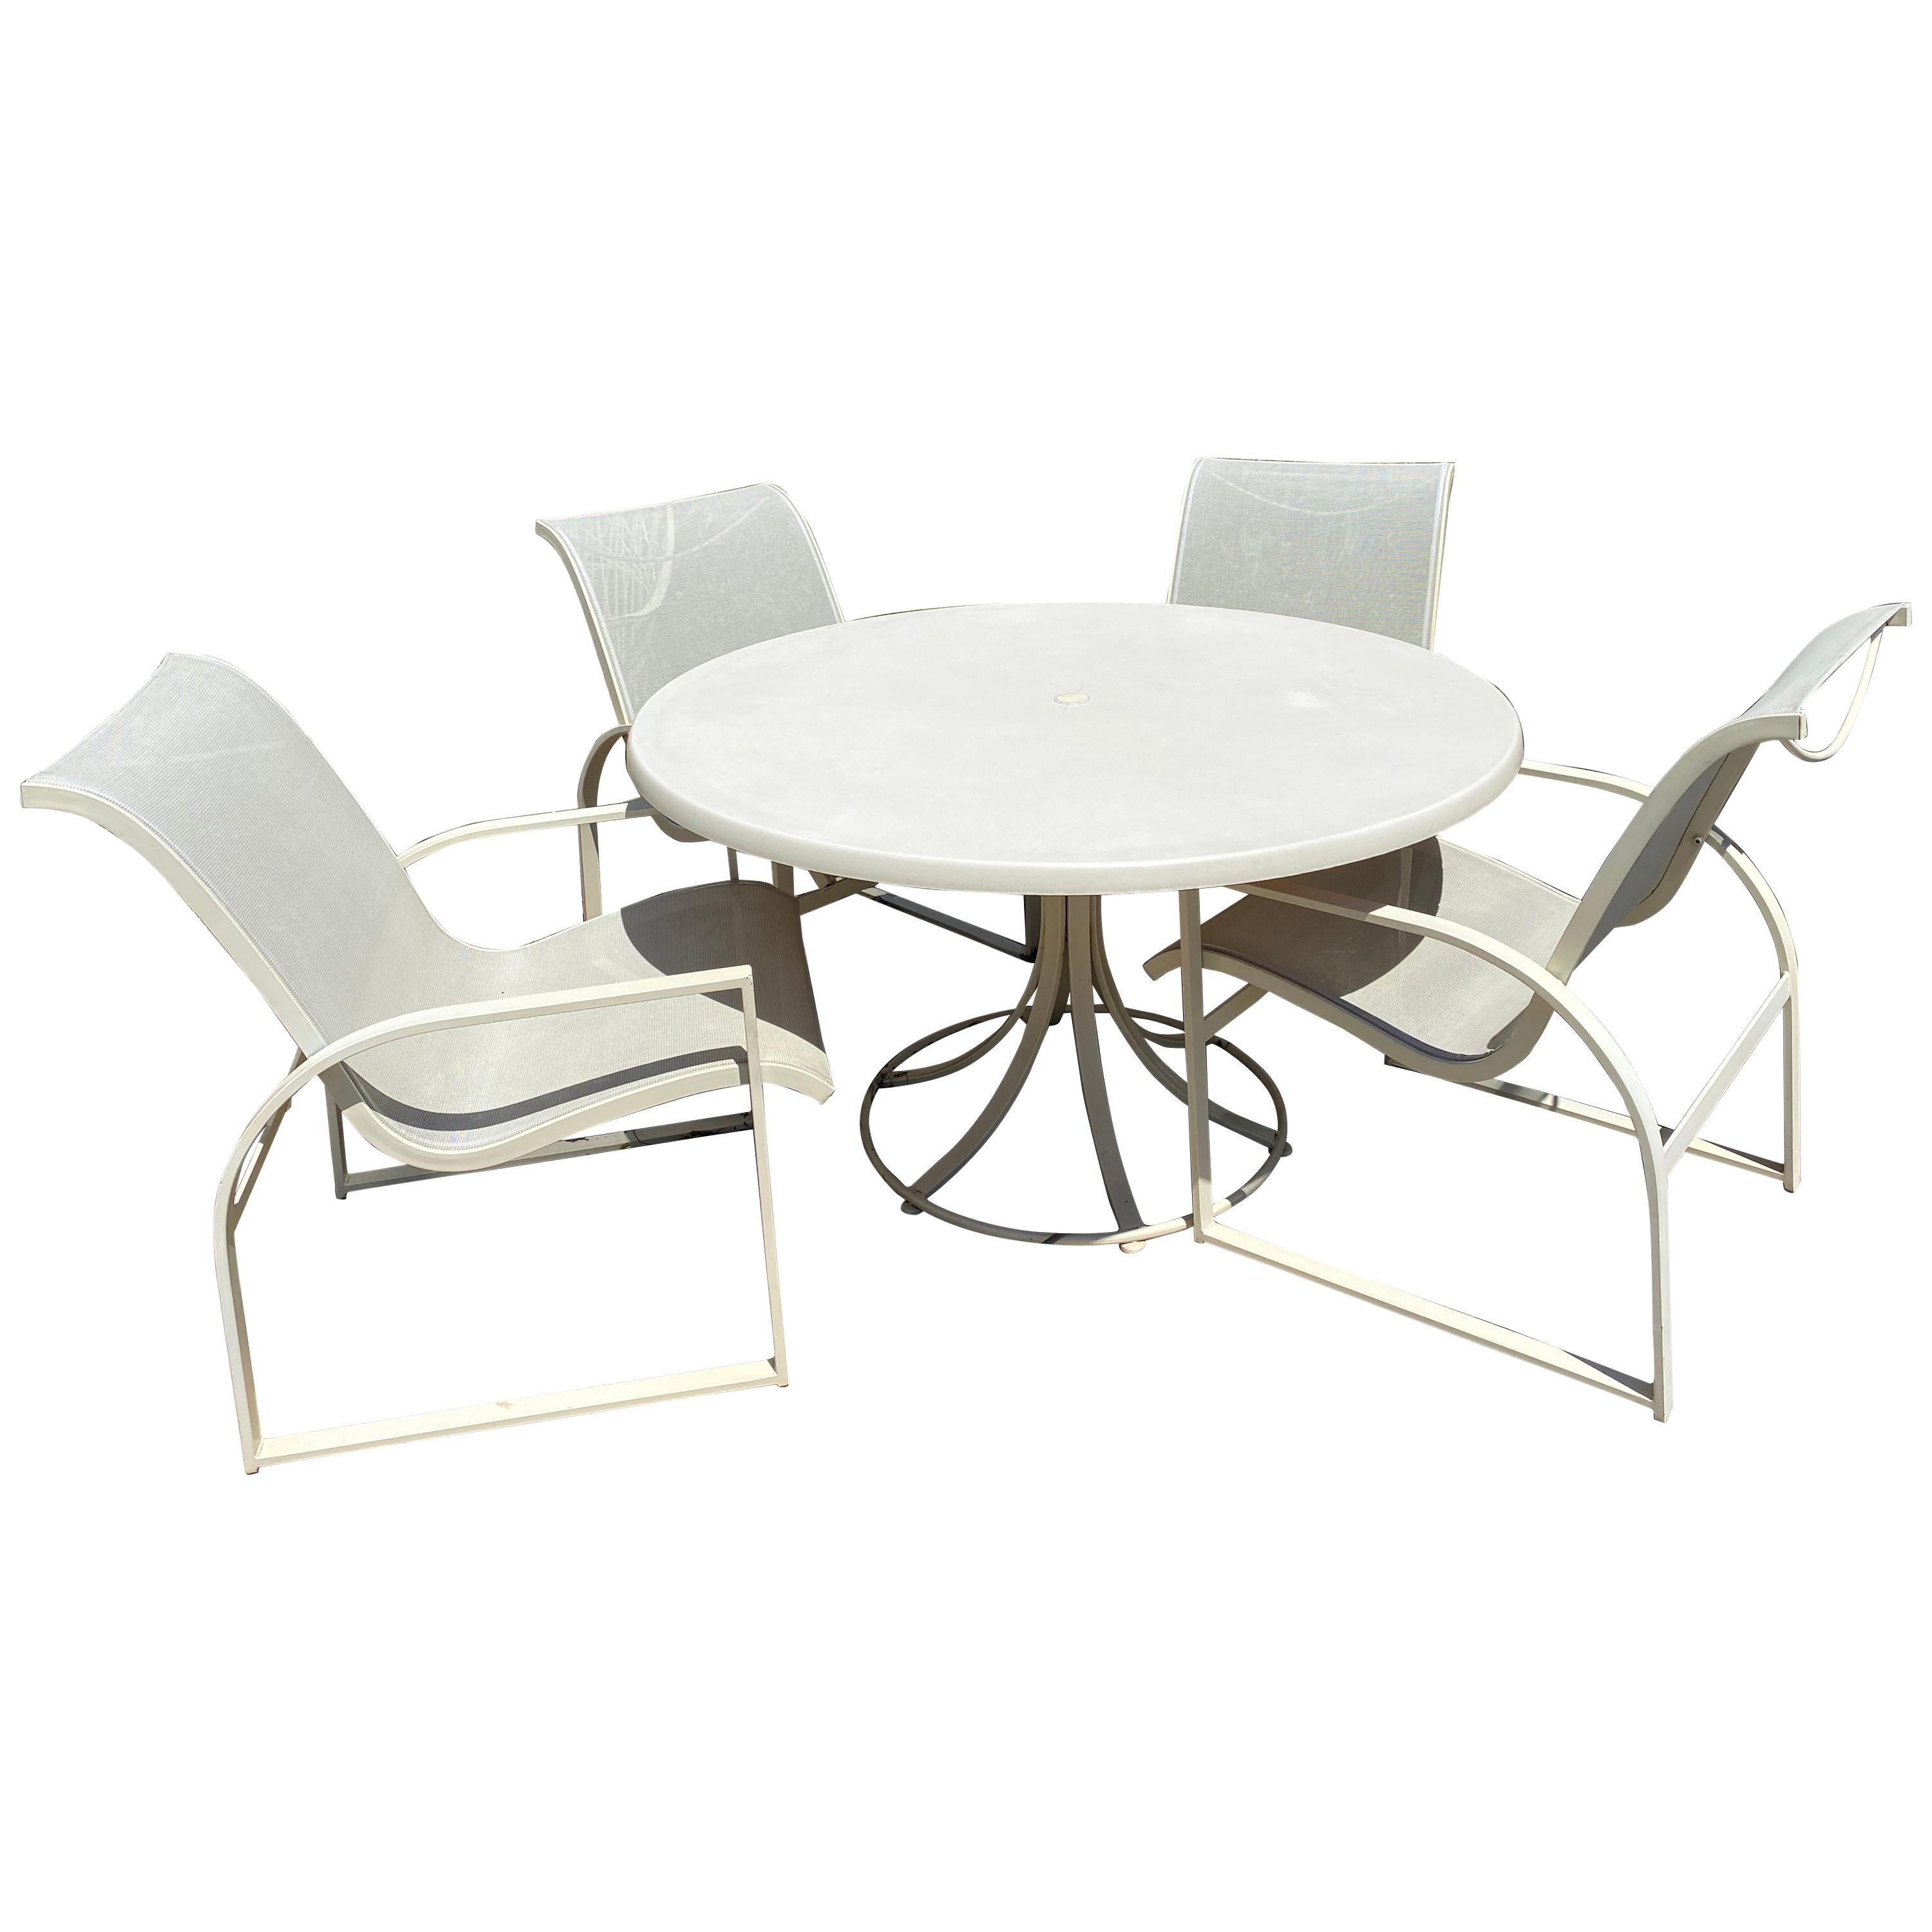 Mid-Century Modern Woodard Margarita Patio Dining Set Table 4 Curved Chairs